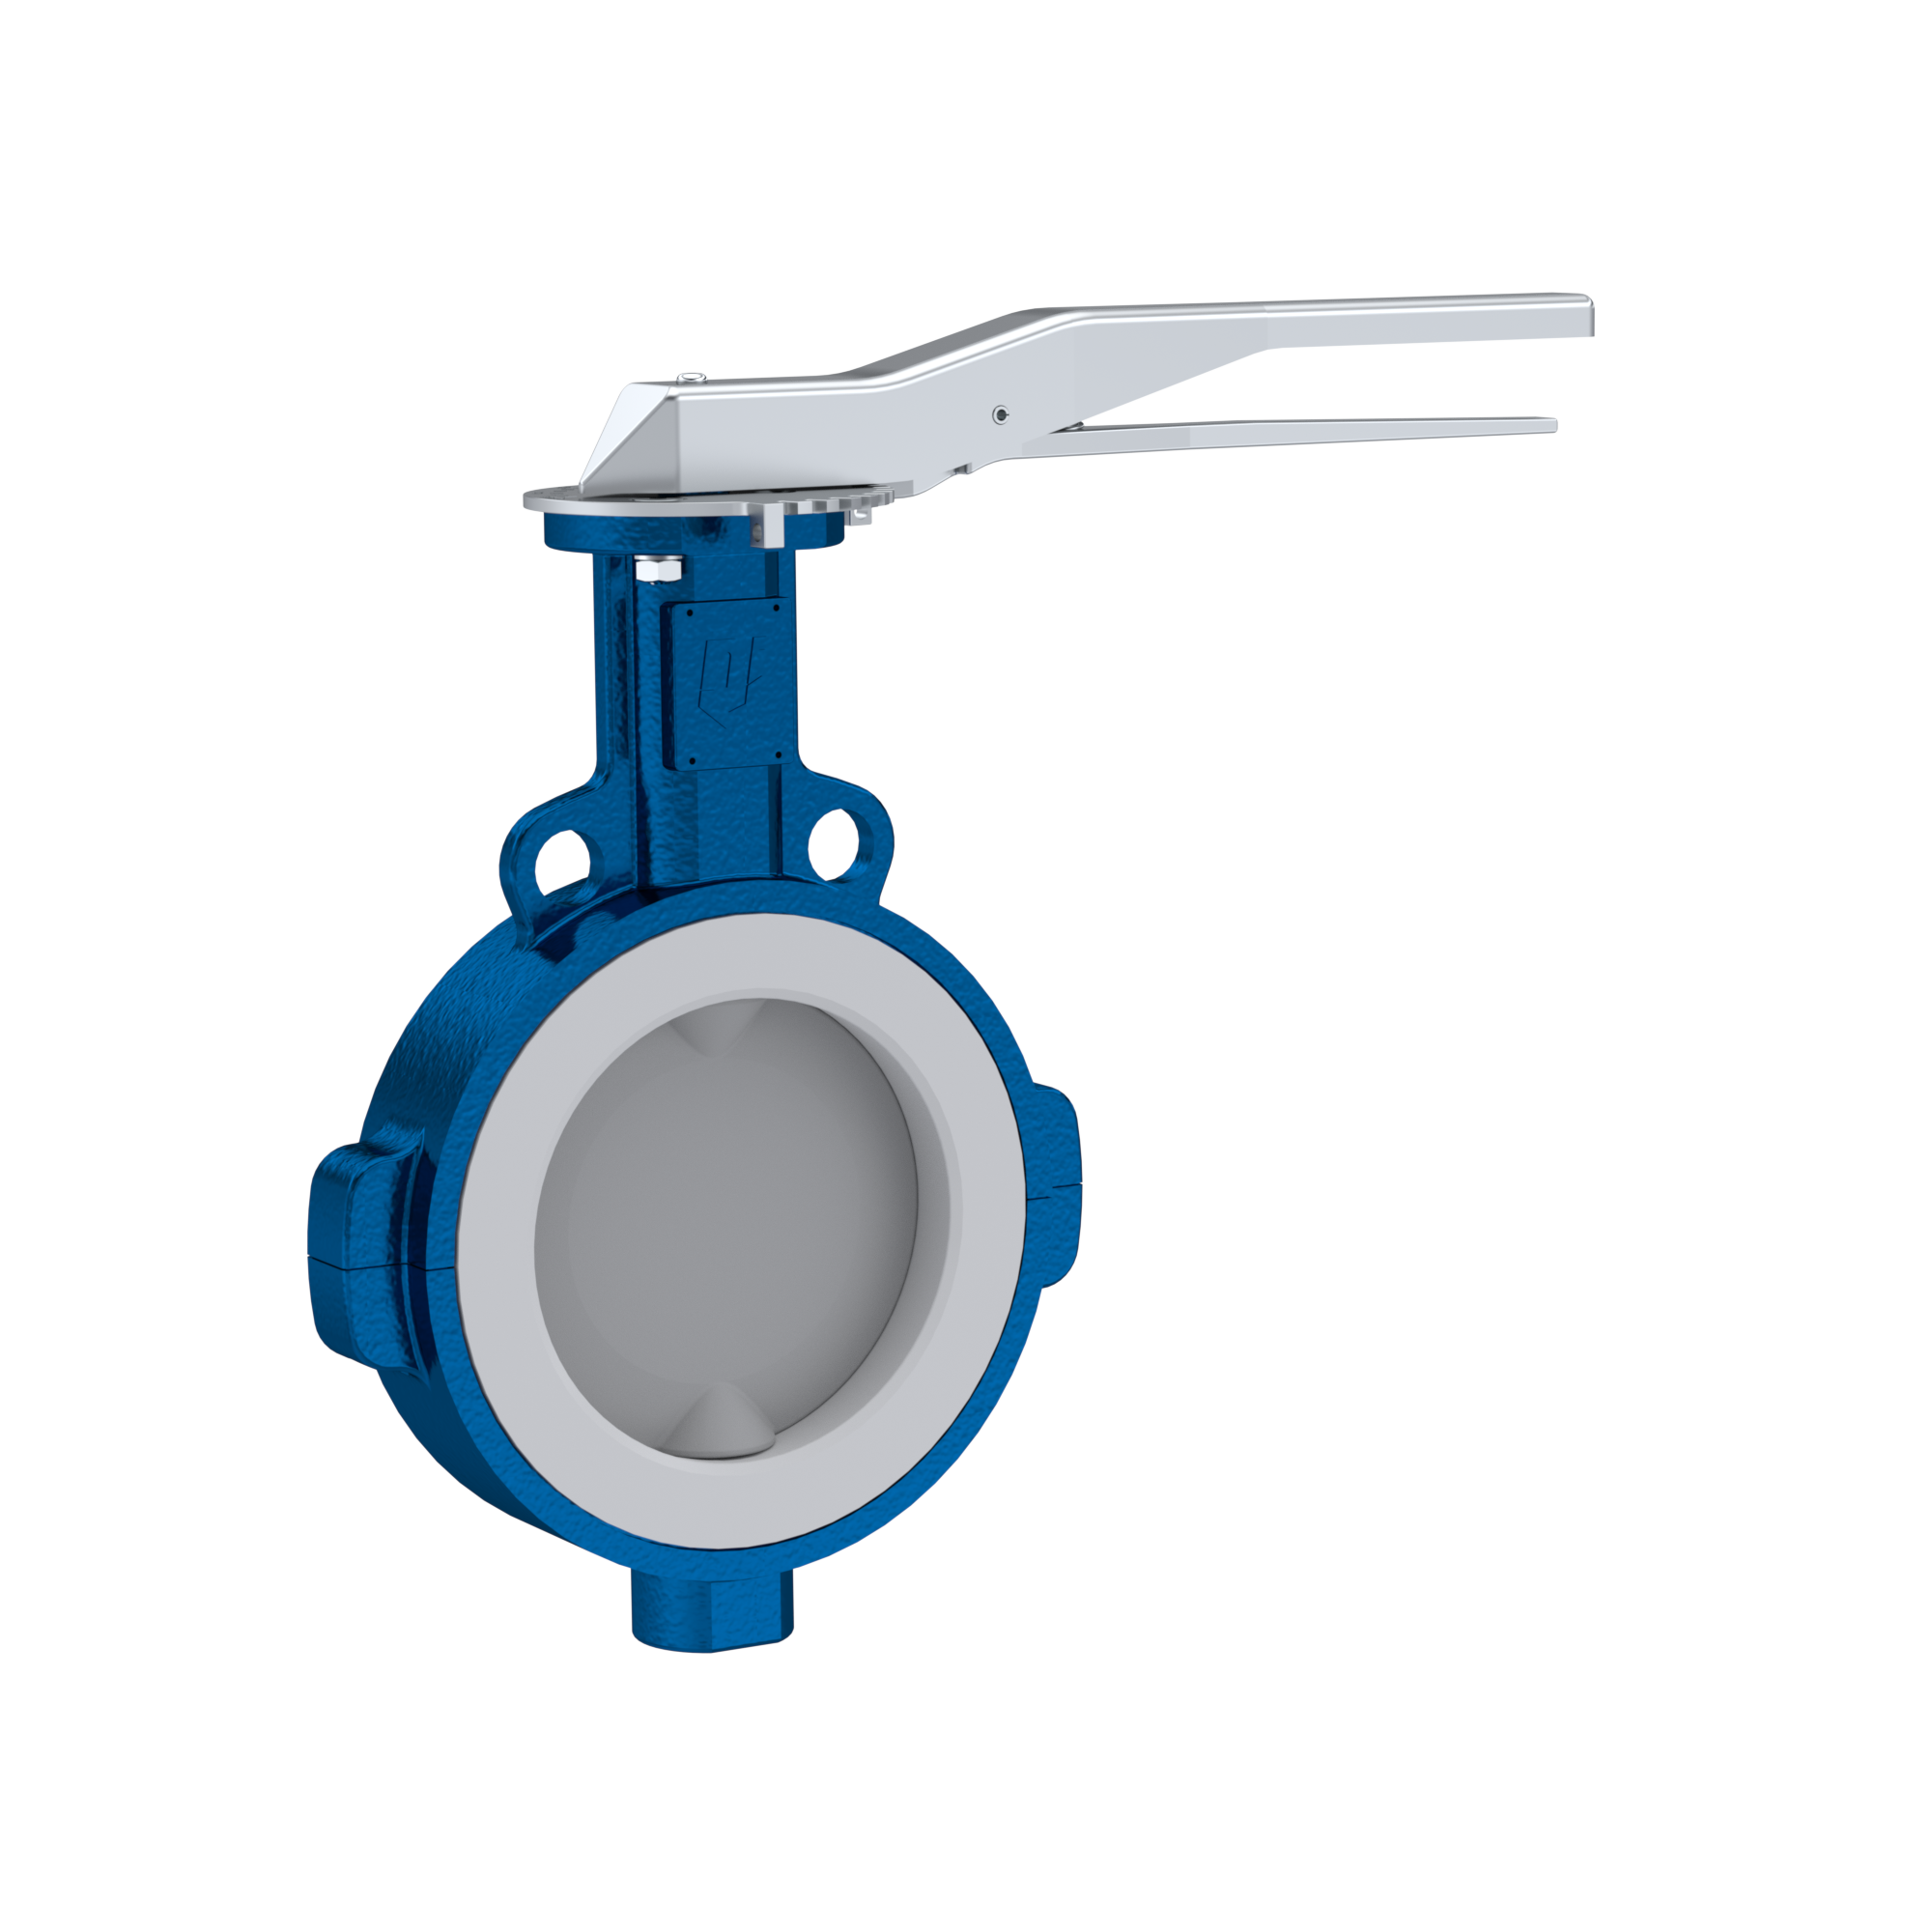 Butterfly-valve PTFE AK09 DN300 ANSI150 lever silicone insert